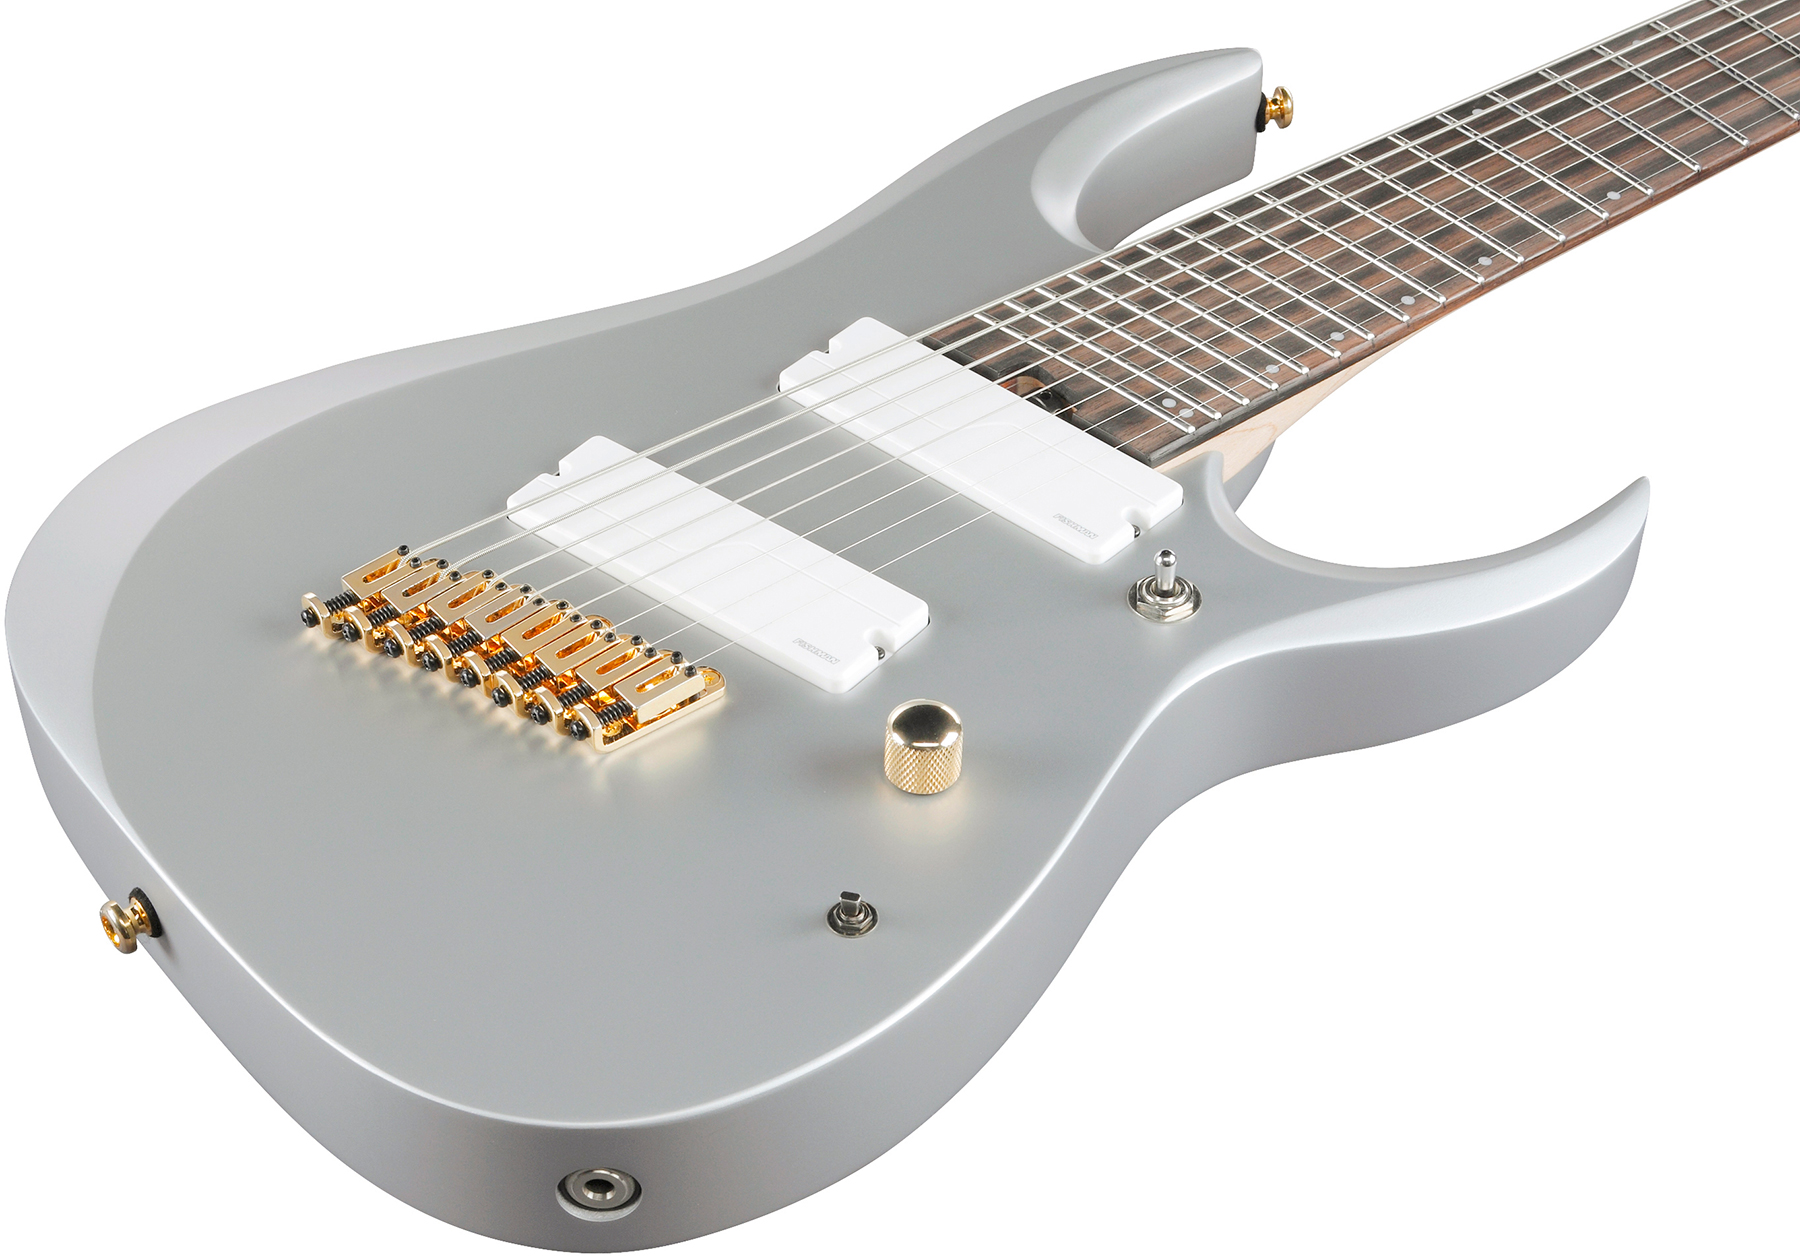 Ibanez Rgdms8 Csm Axe Design Lab 8c Multiscale 2h Fishman Fluence Modern Ht Eb - Classic Silver Matte - 8 and 9 string electric guitar - Variation 2